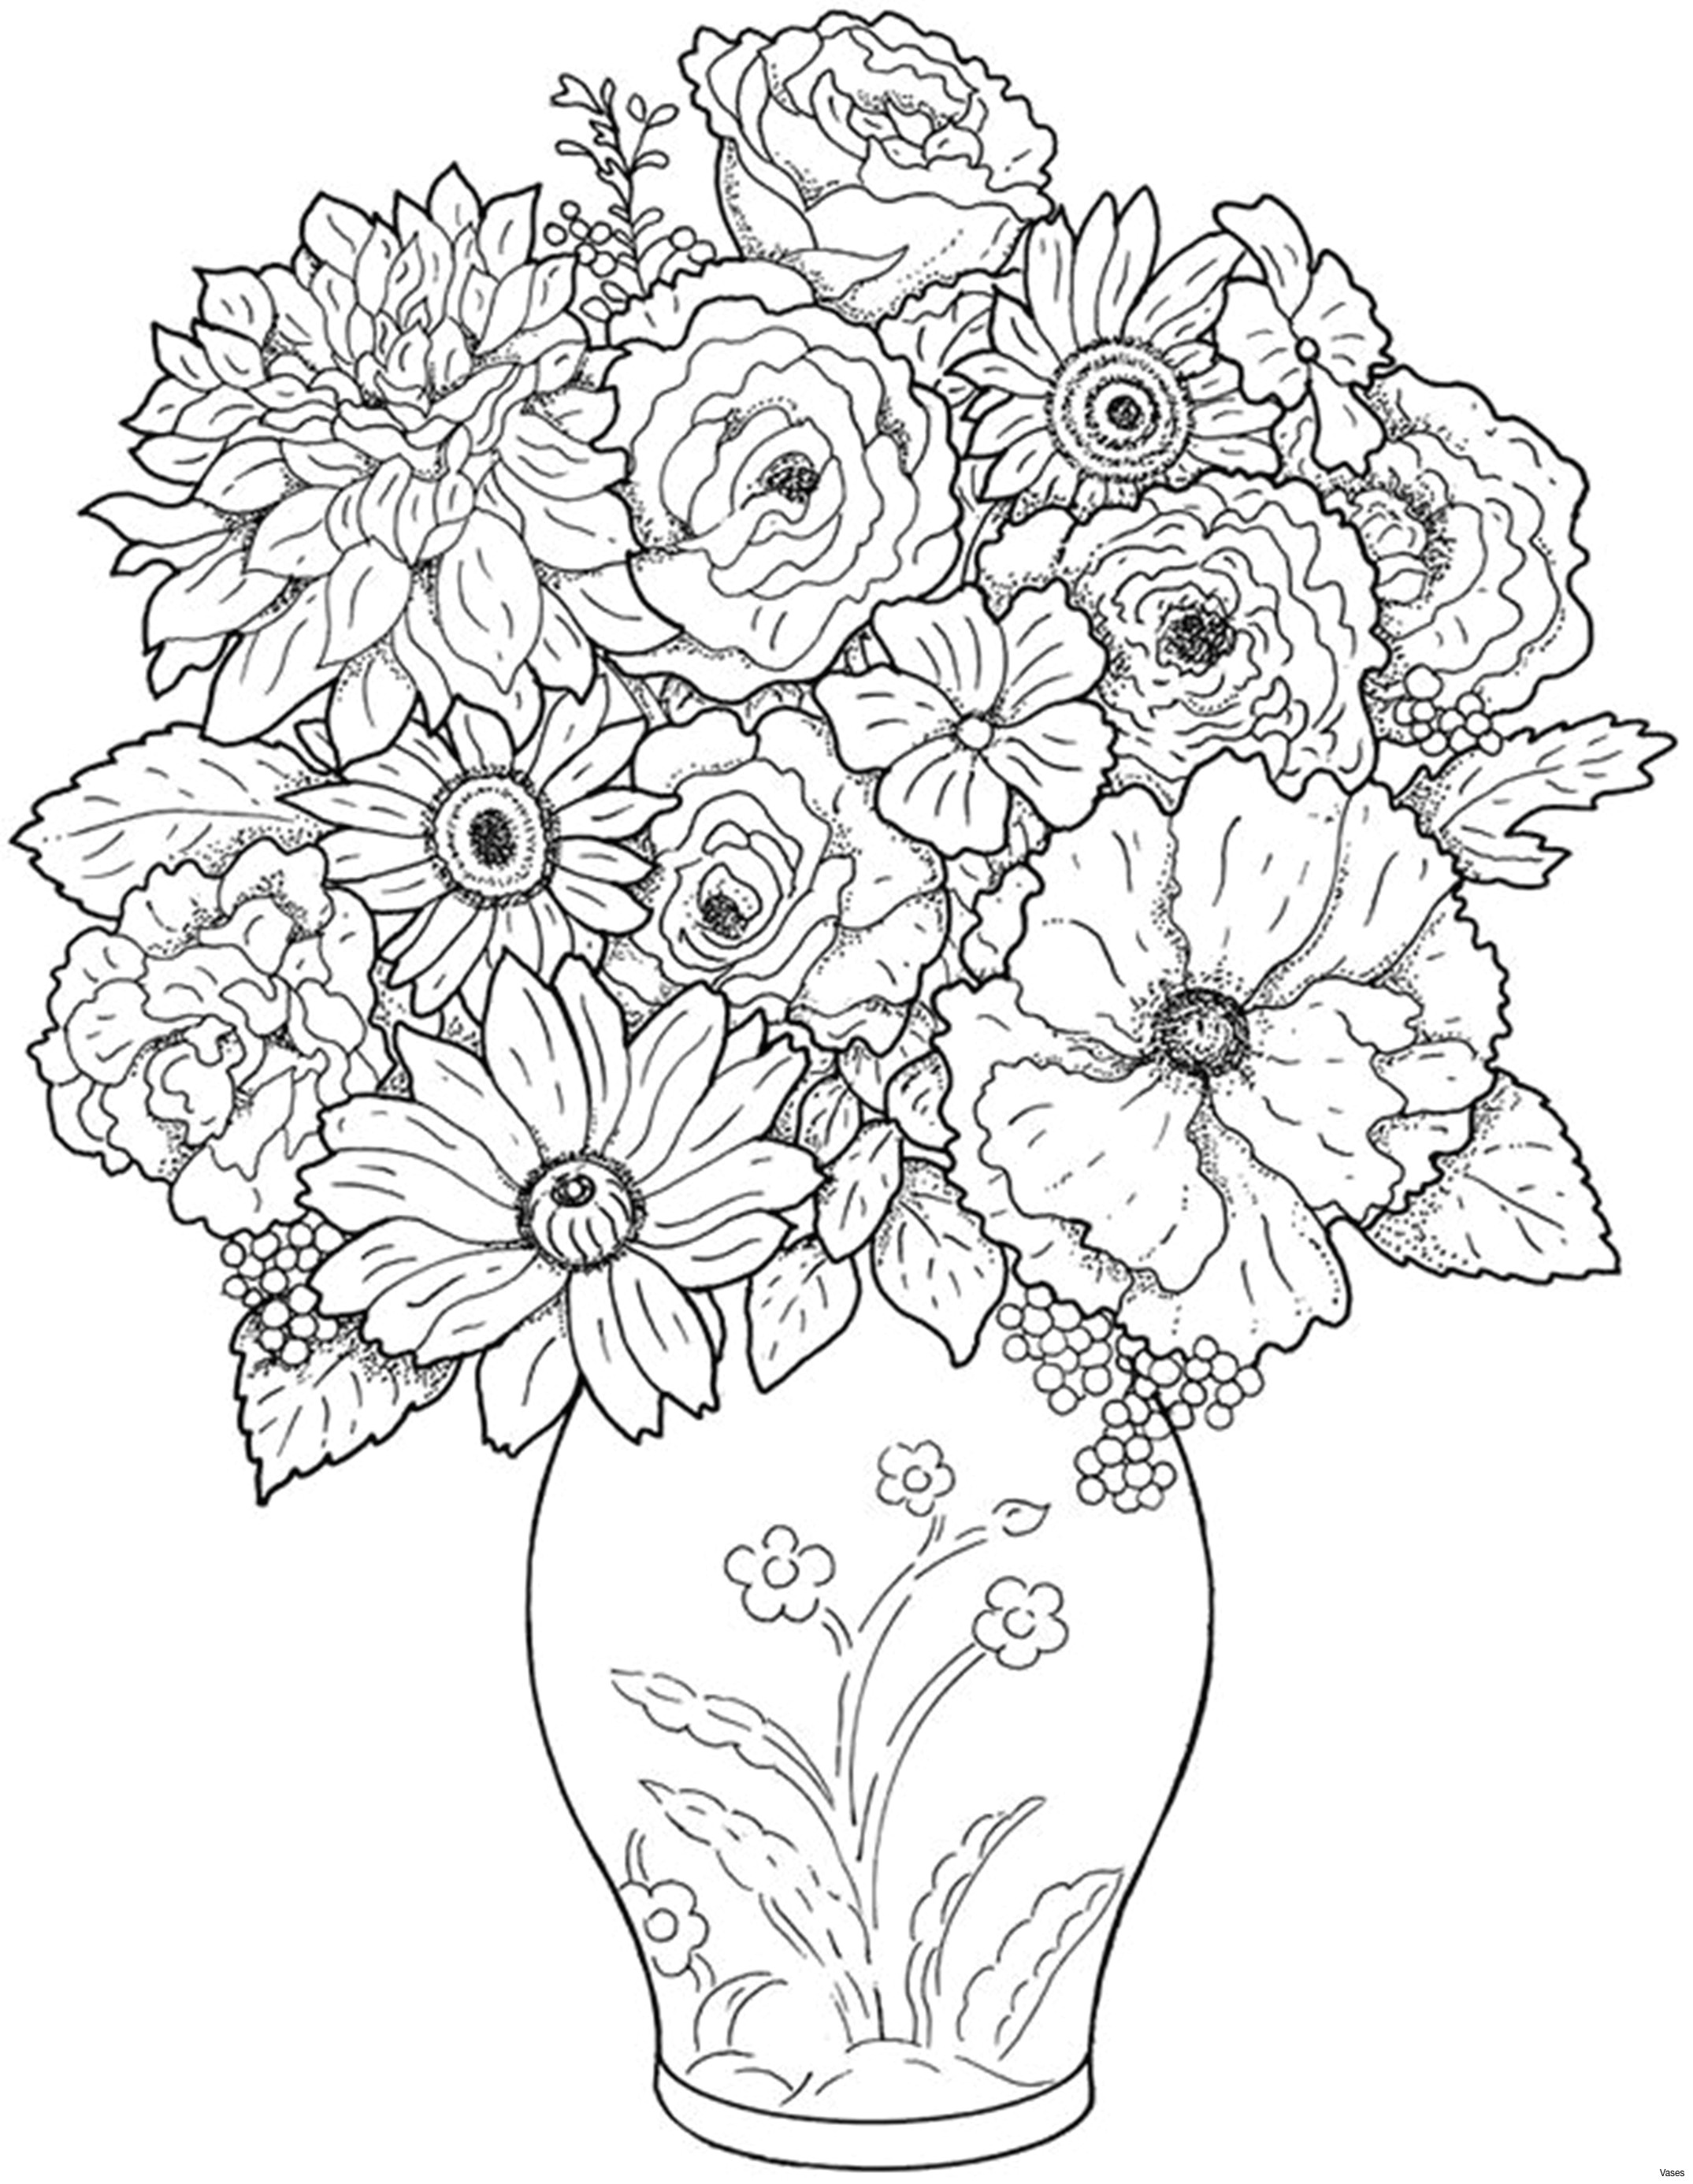 Drawing Images Of Flower Designs Www Colouring Pages Aua Ergewohnliche Cool Vases Flower Vase Coloring